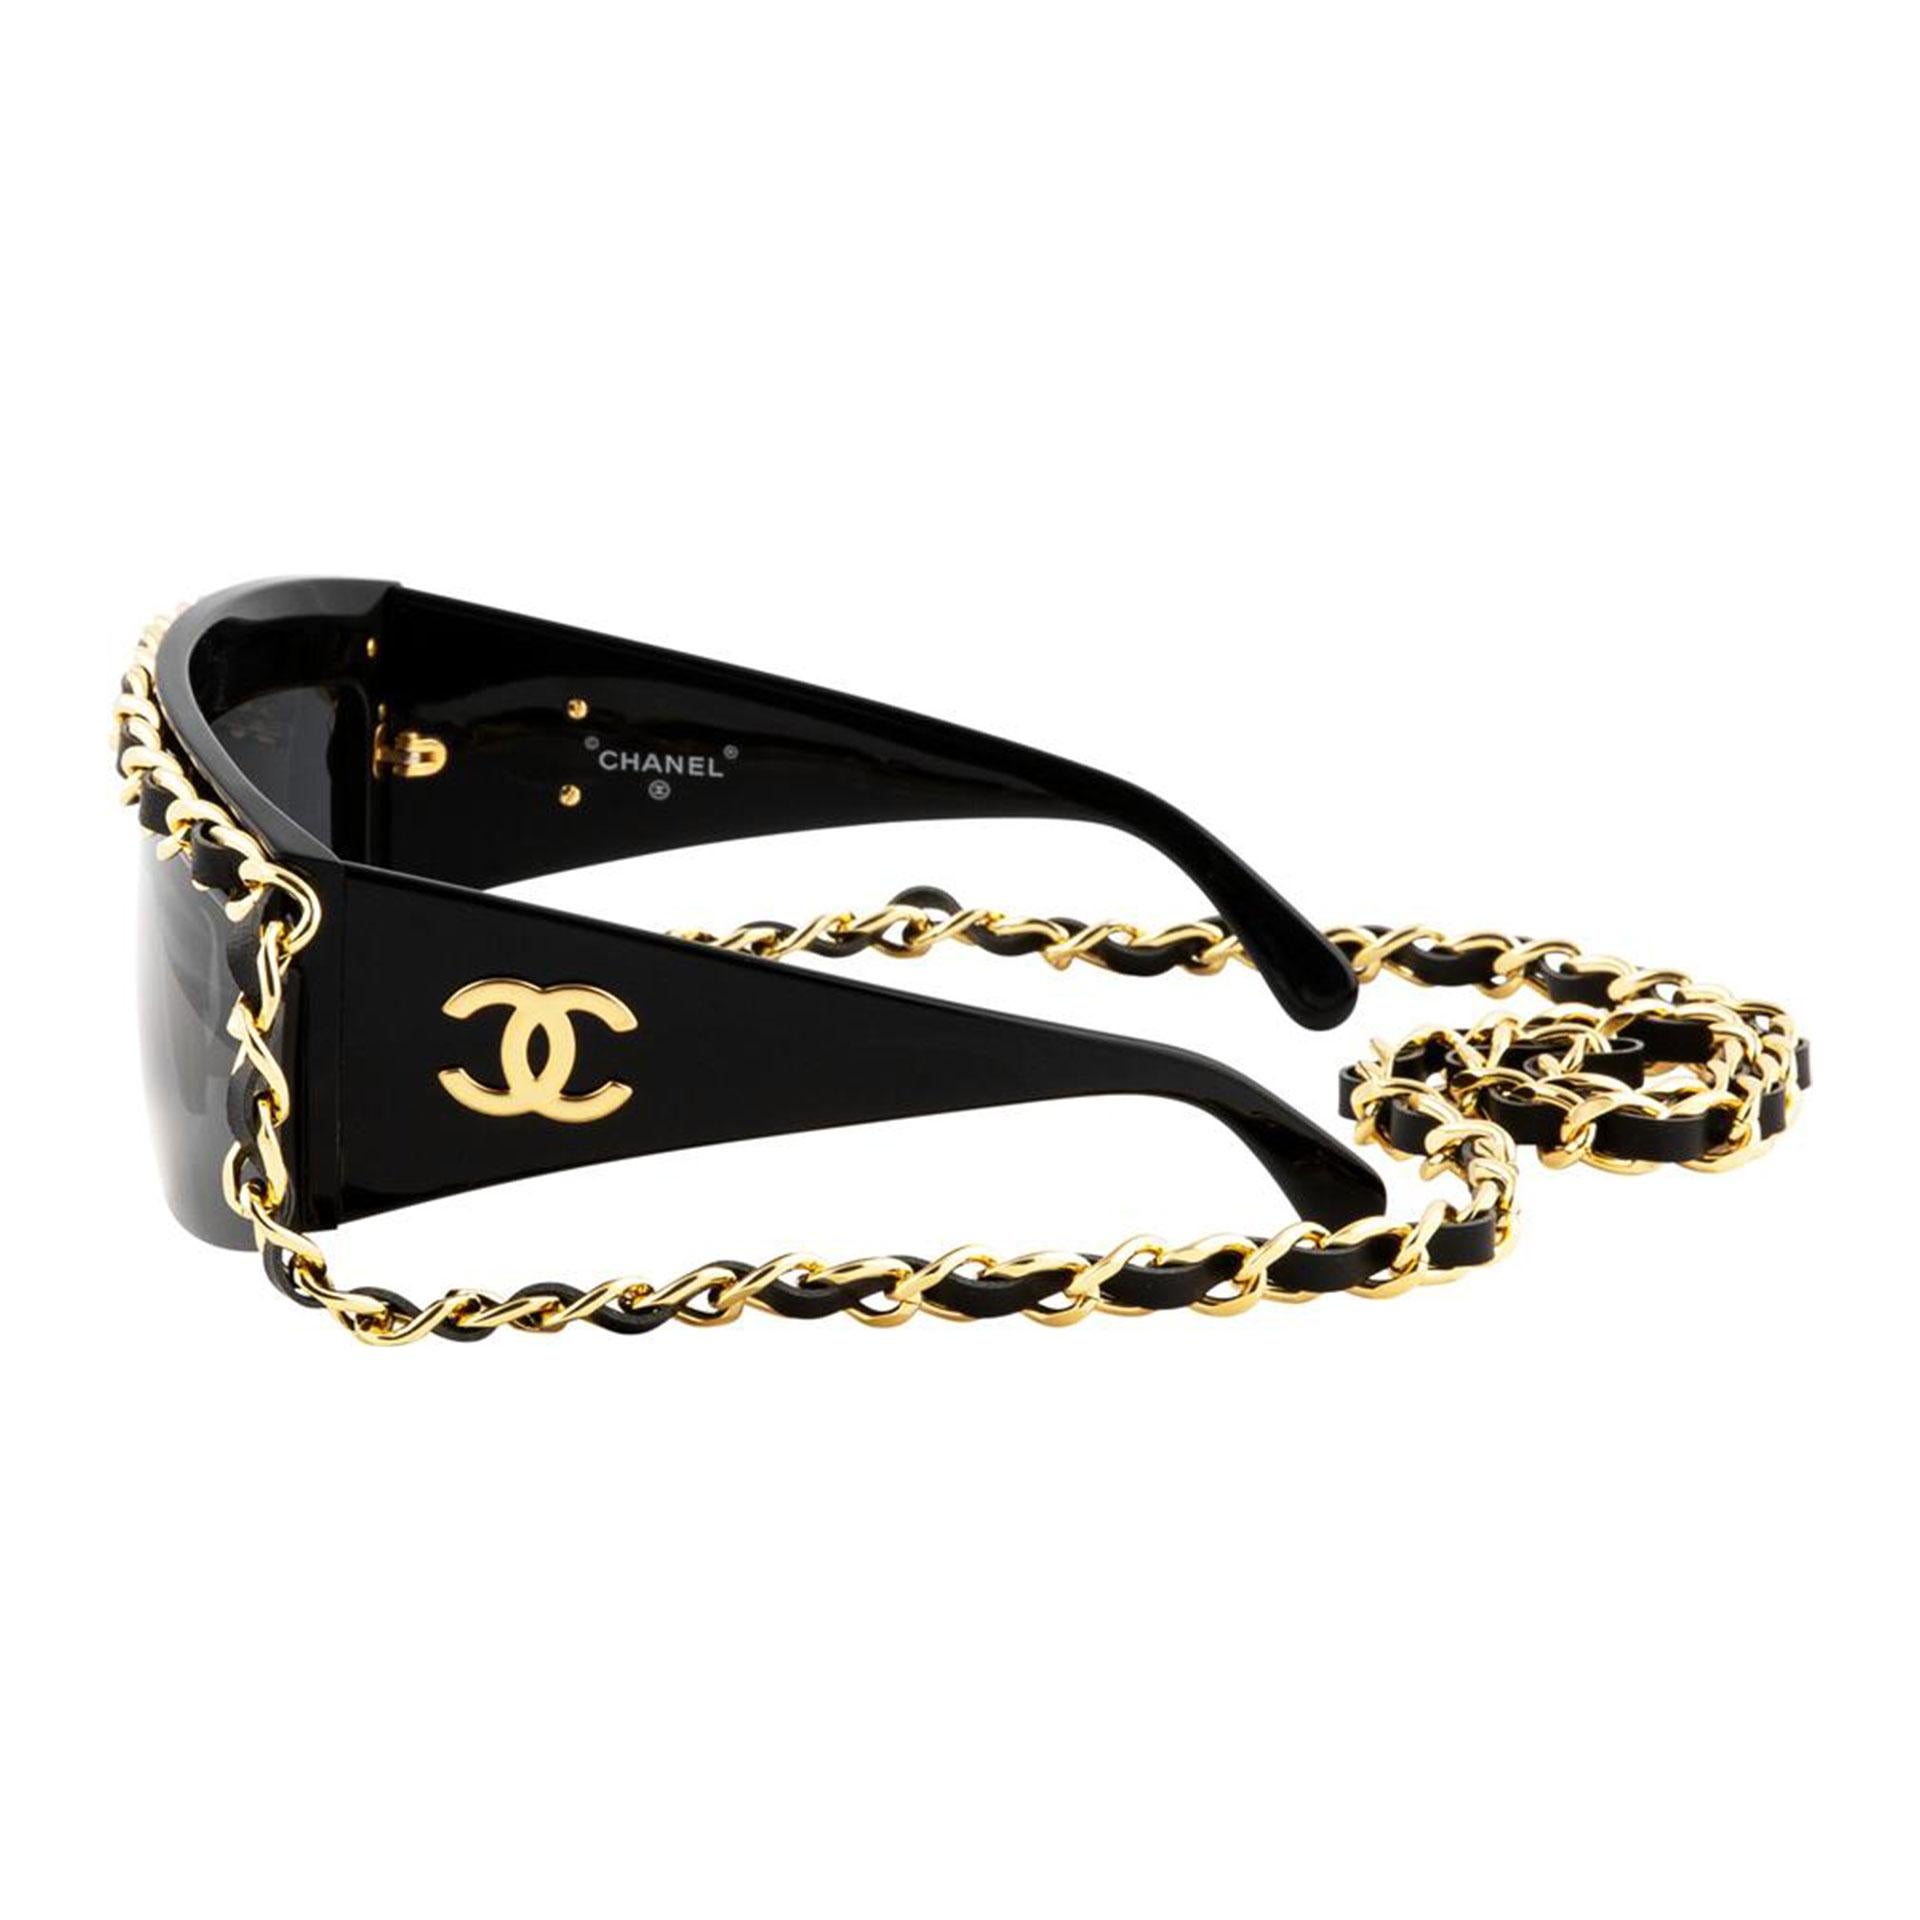 Chanel Black and Gold Rare Vintage Runway Long Chain Necklace Sunglasses In Good Condition For Sale In Miami, FL